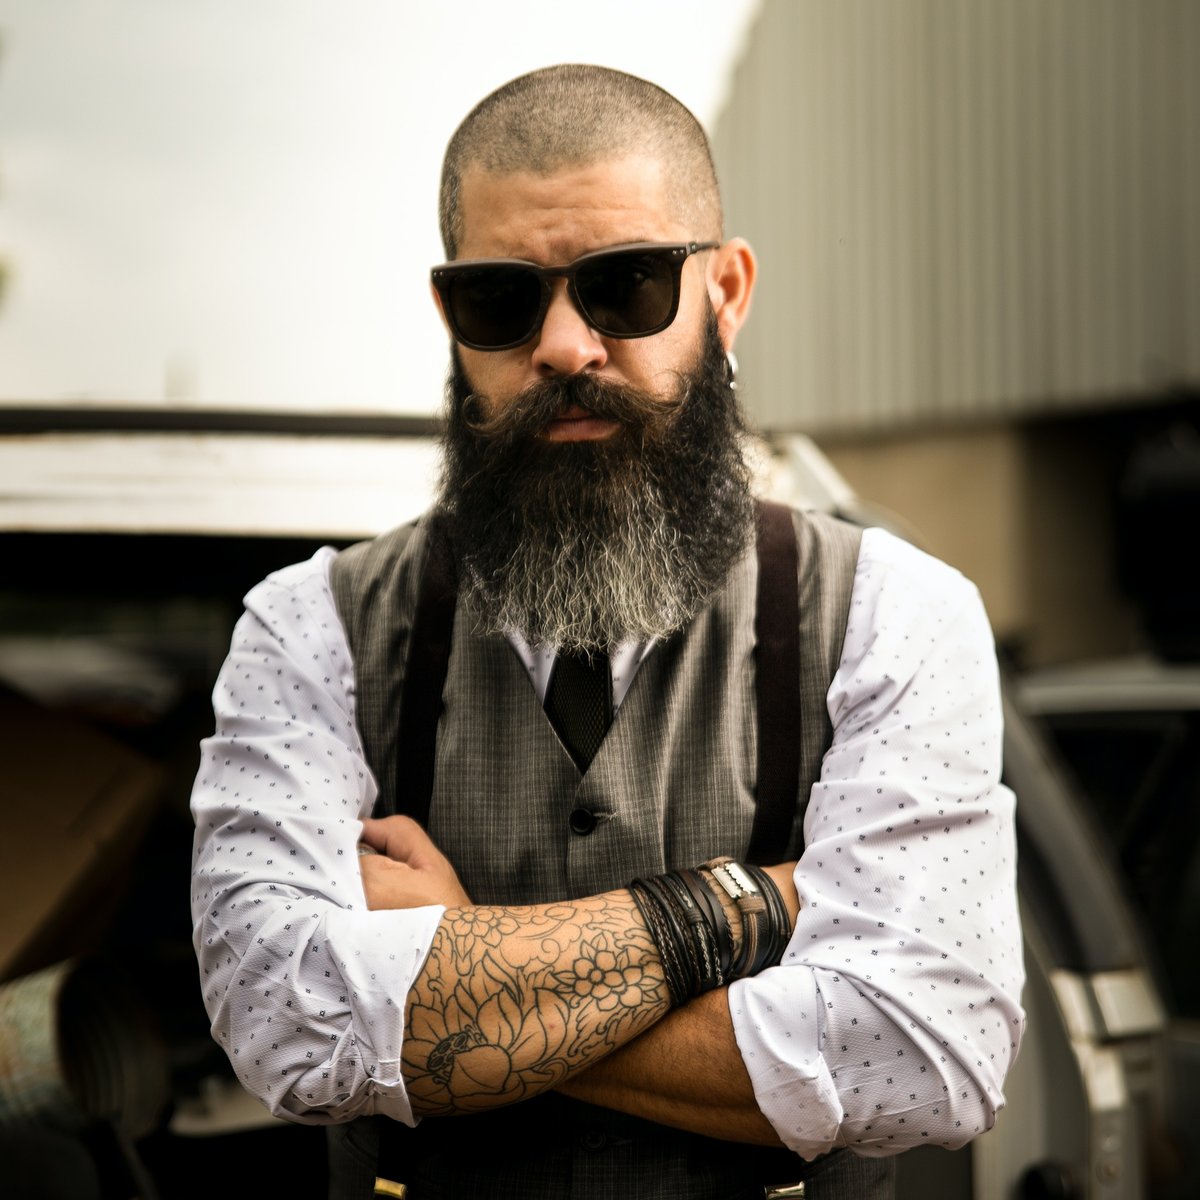 Awesome Beard Styles For Square-Faced Men To Show Off Their Jawlines